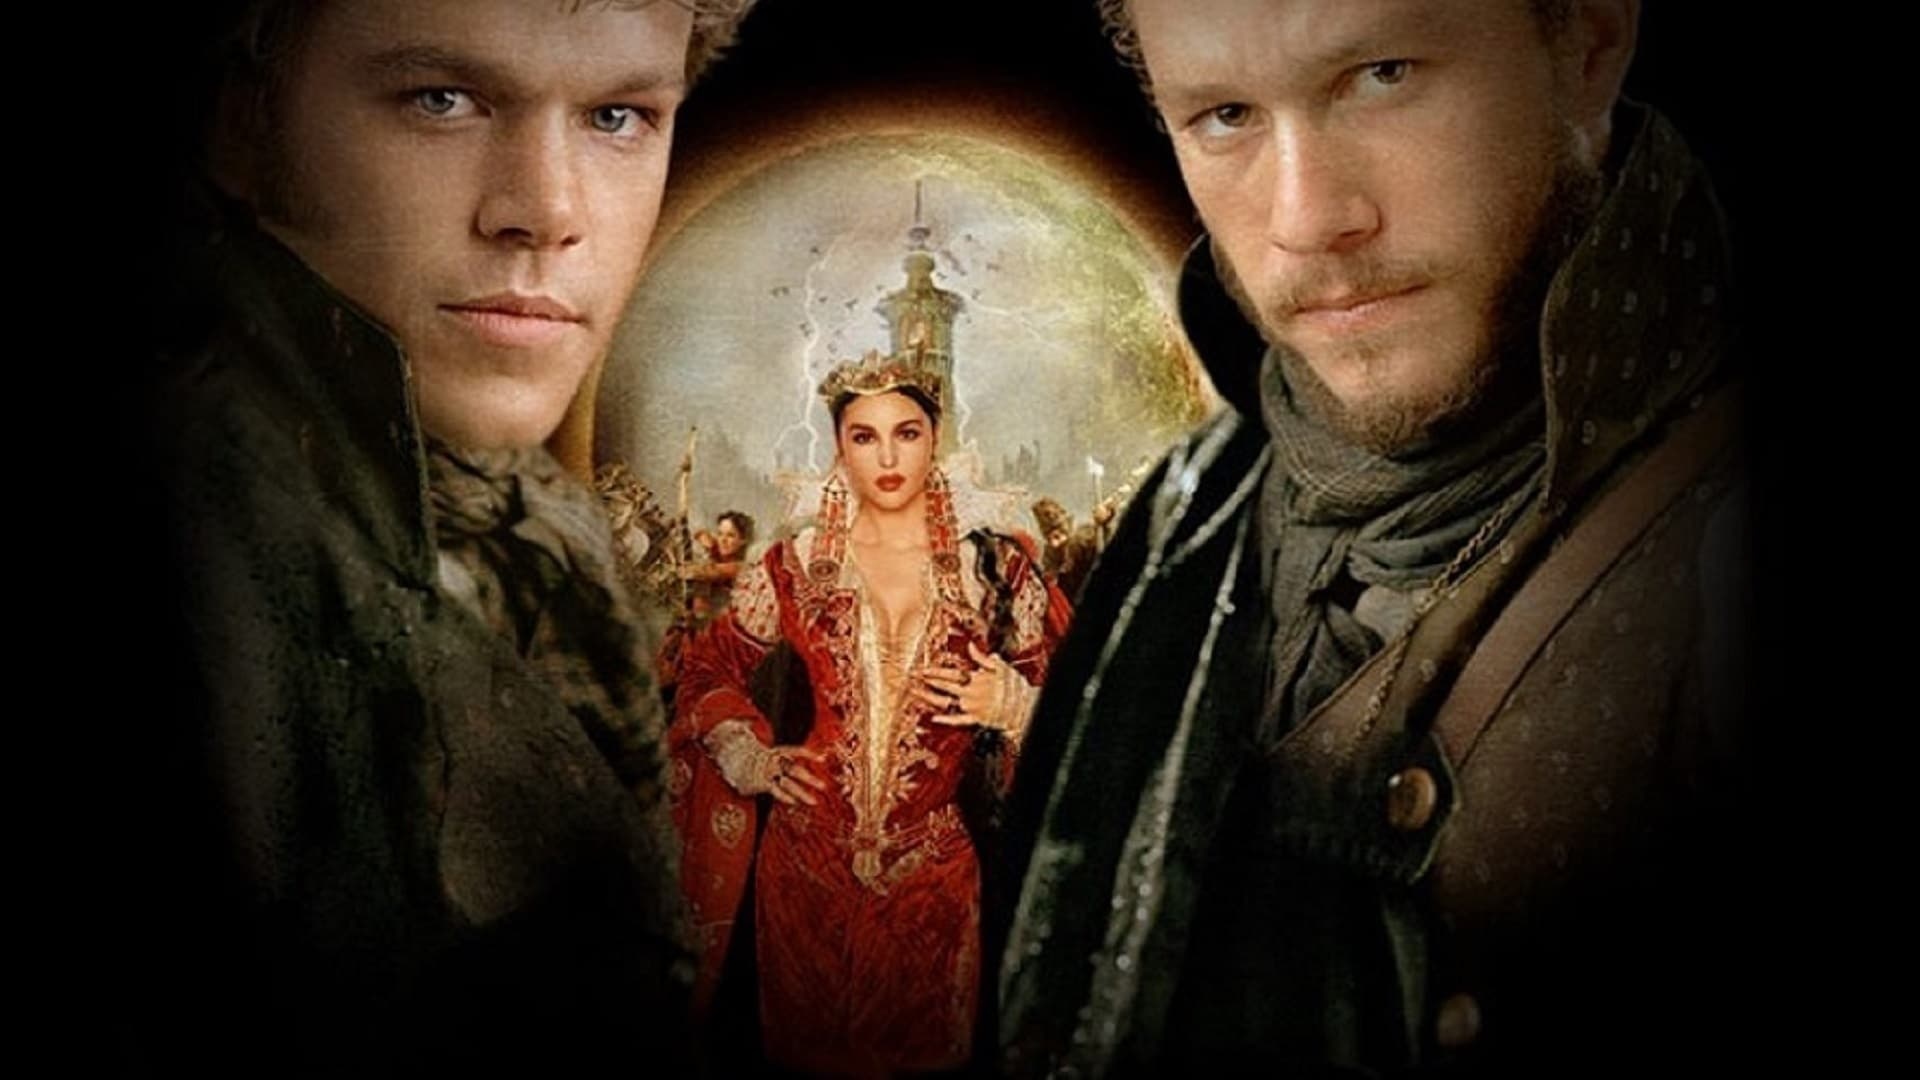 The Brothers Grimm, Legendary storytellers, Historical folklore, Terry Gilliam, 1920x1080 Full HD Desktop